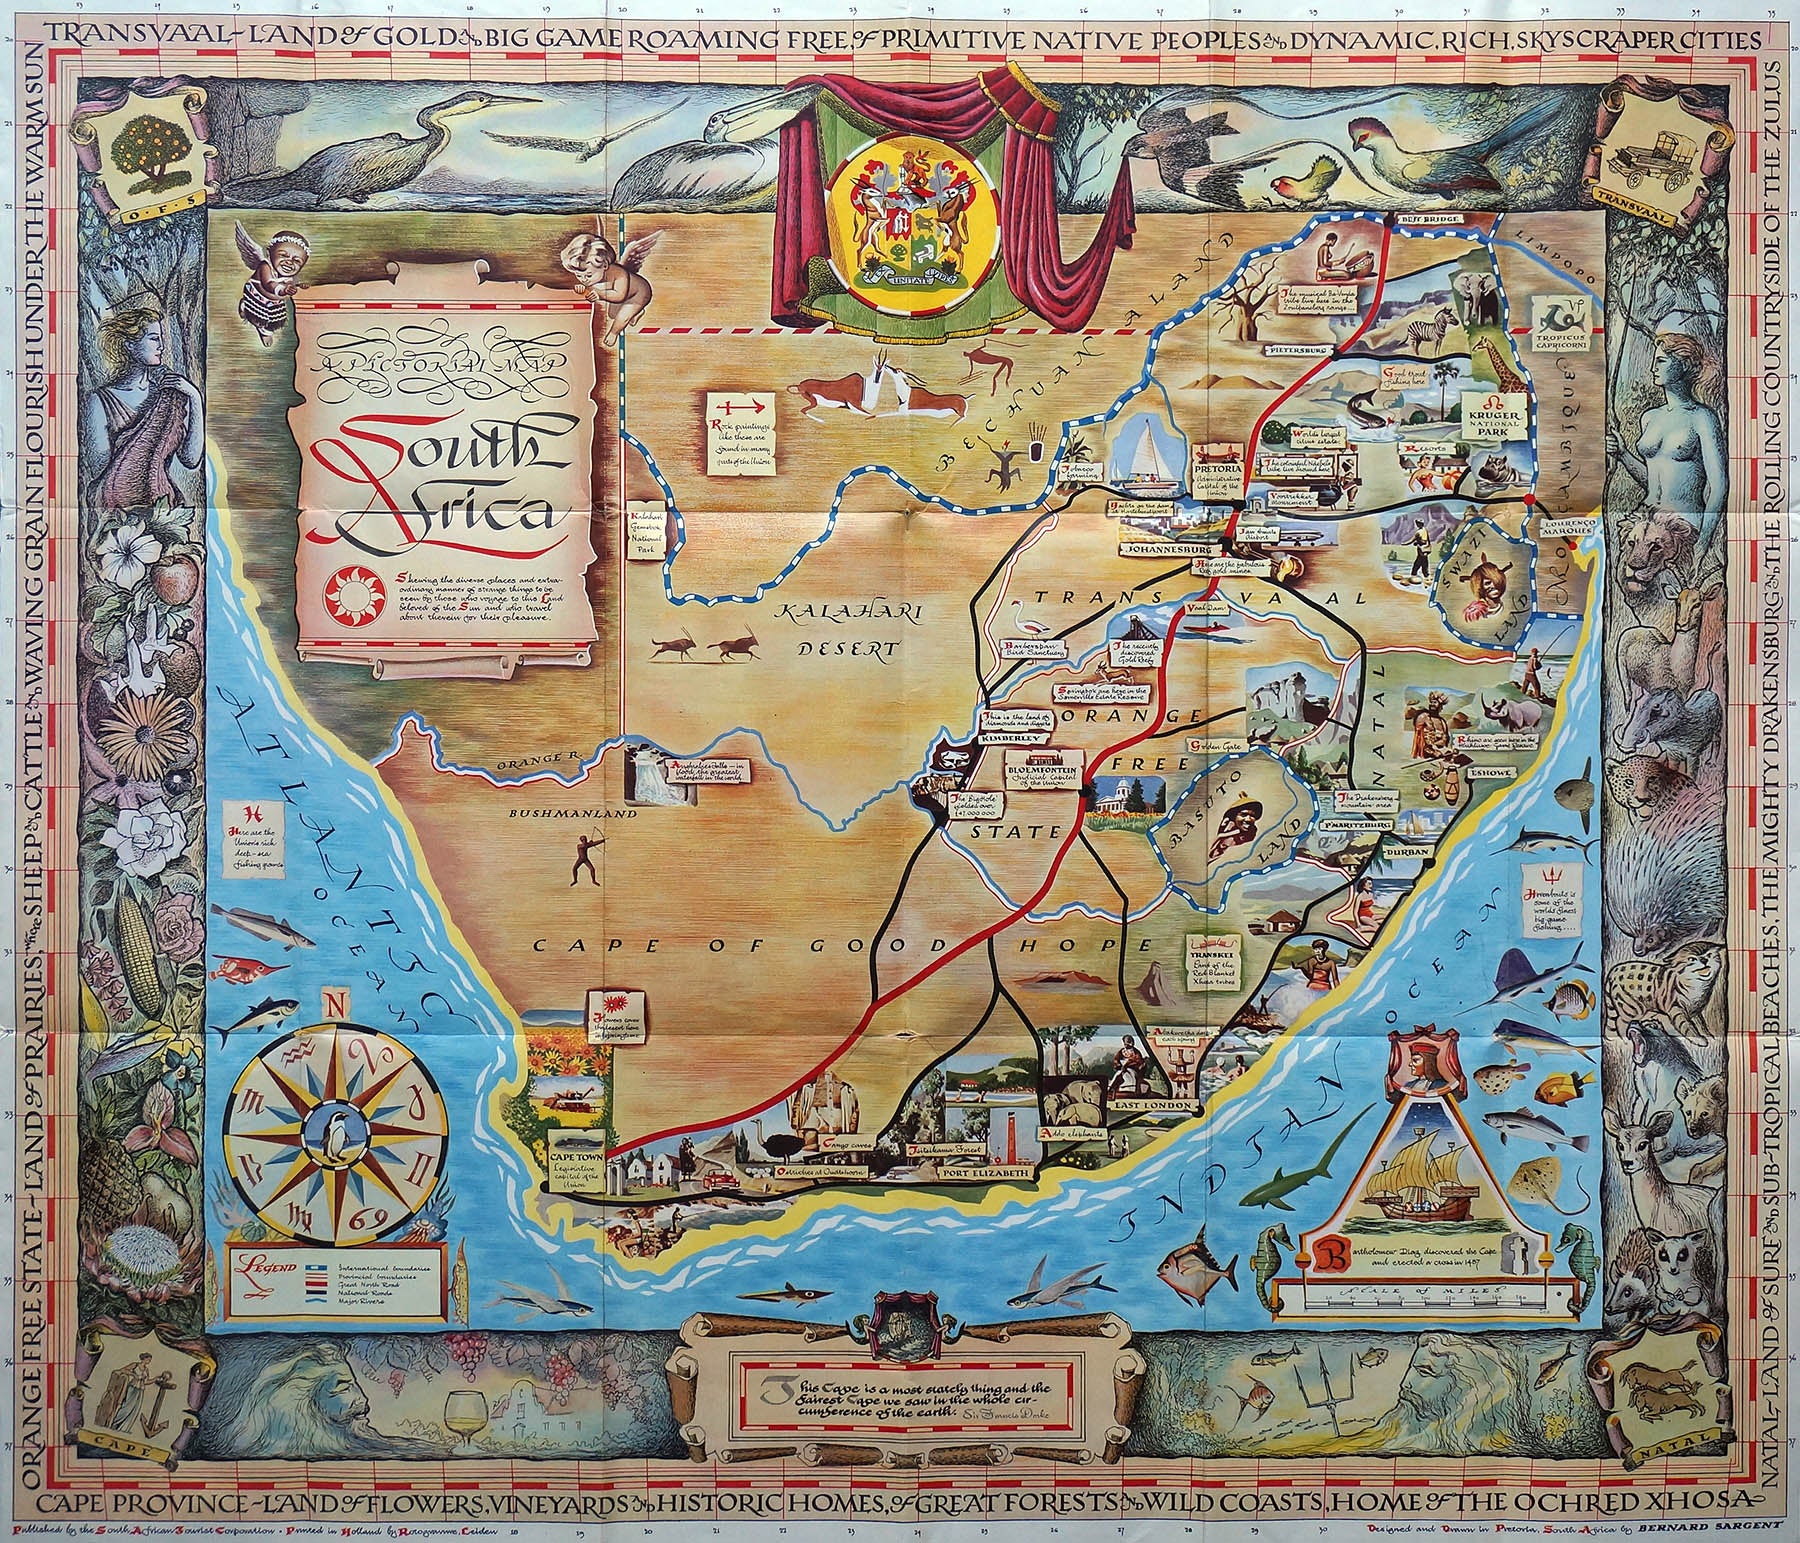 (South Africa)  A Pictorial Map of South Africa